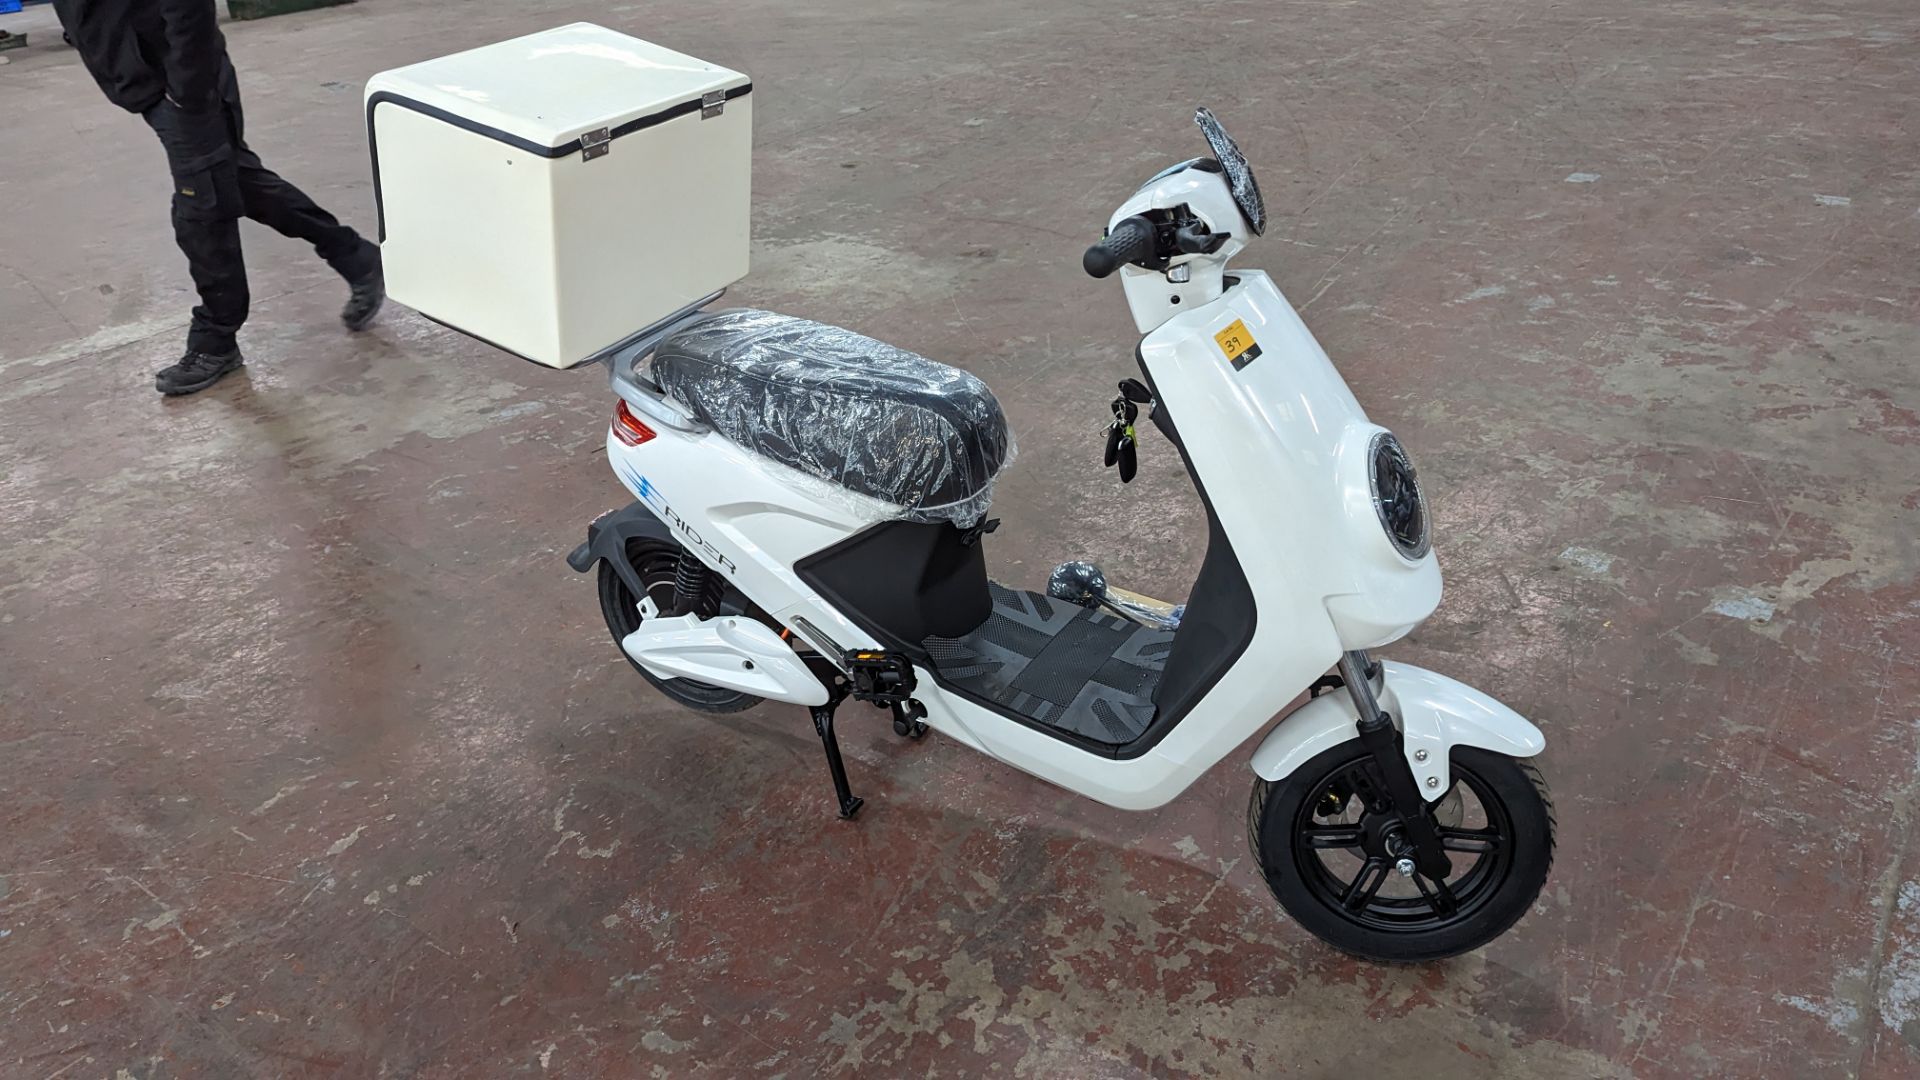 Model 18 Electric Bike: Zero (0) recorded miles, white body with black detailing, insulated box moun - Image 7 of 14